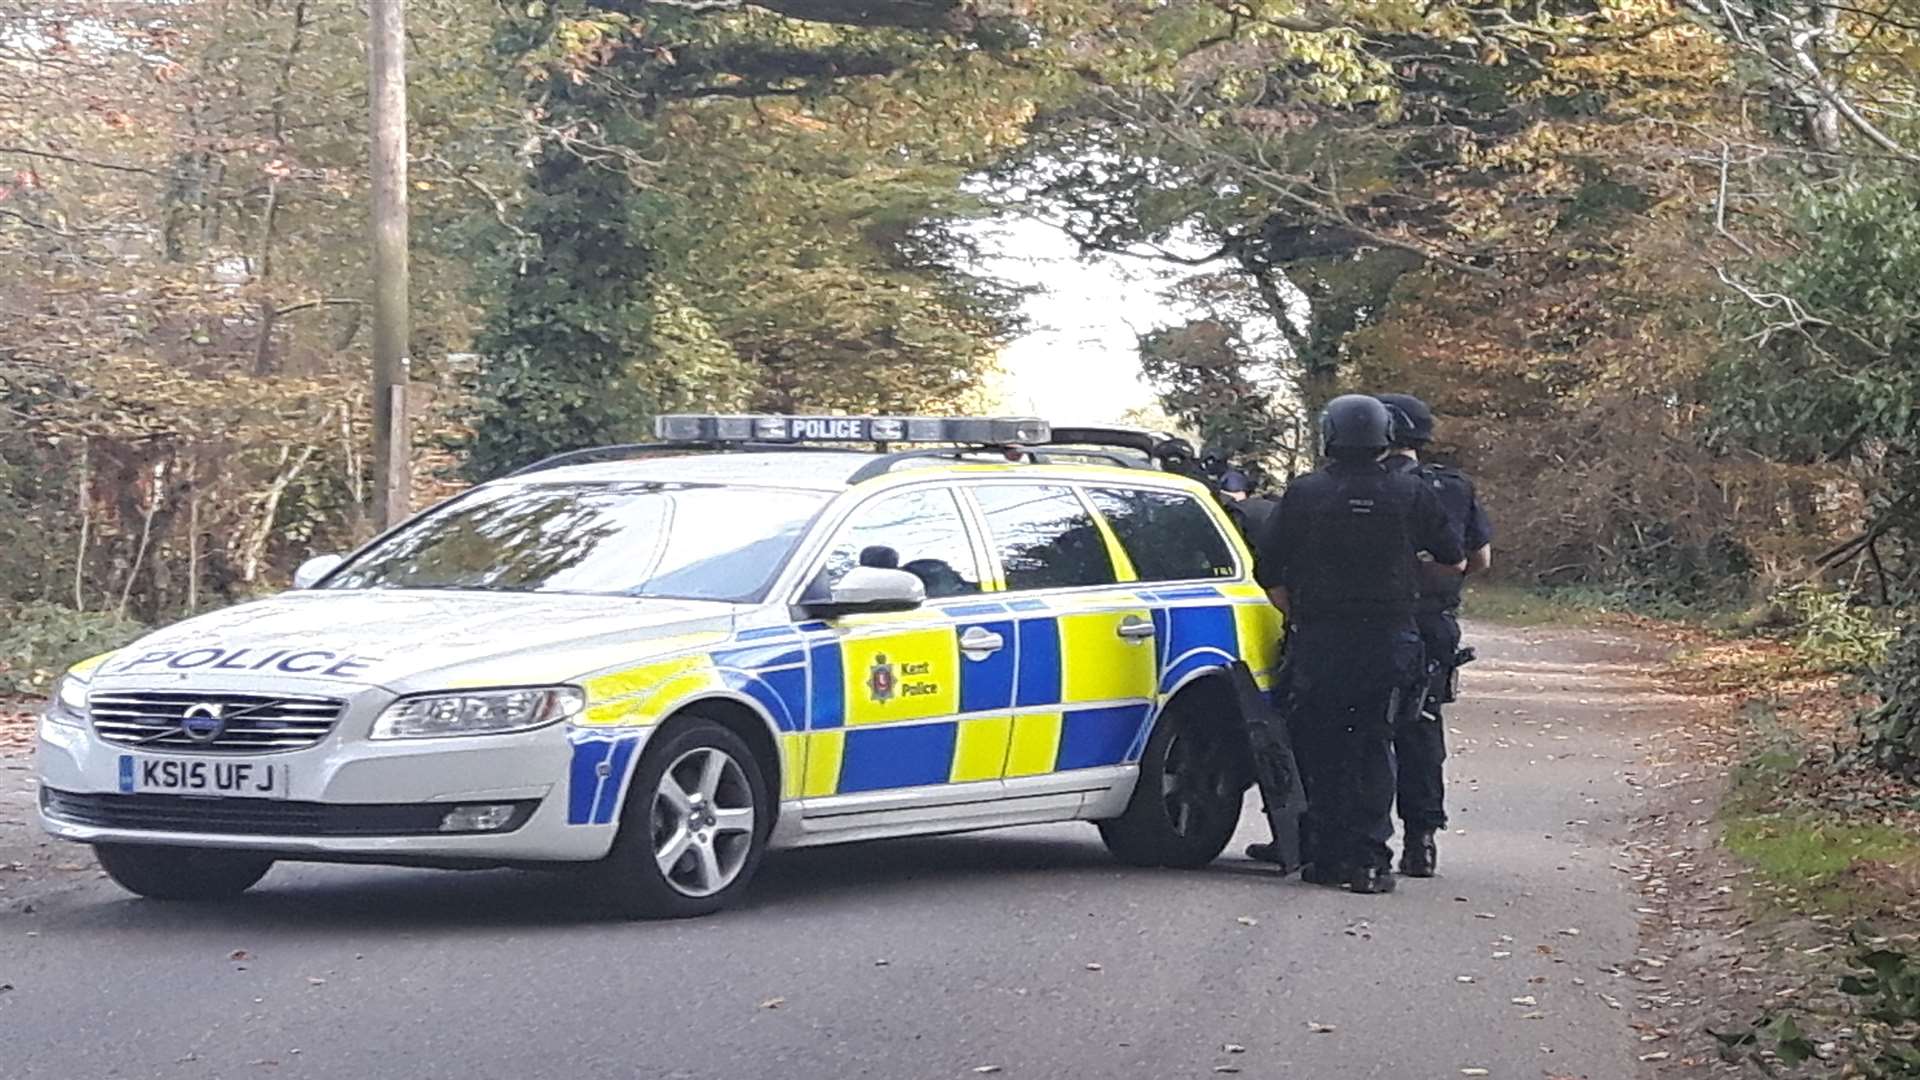 Armed police near the scene. Picture by reporter Vicky Castle